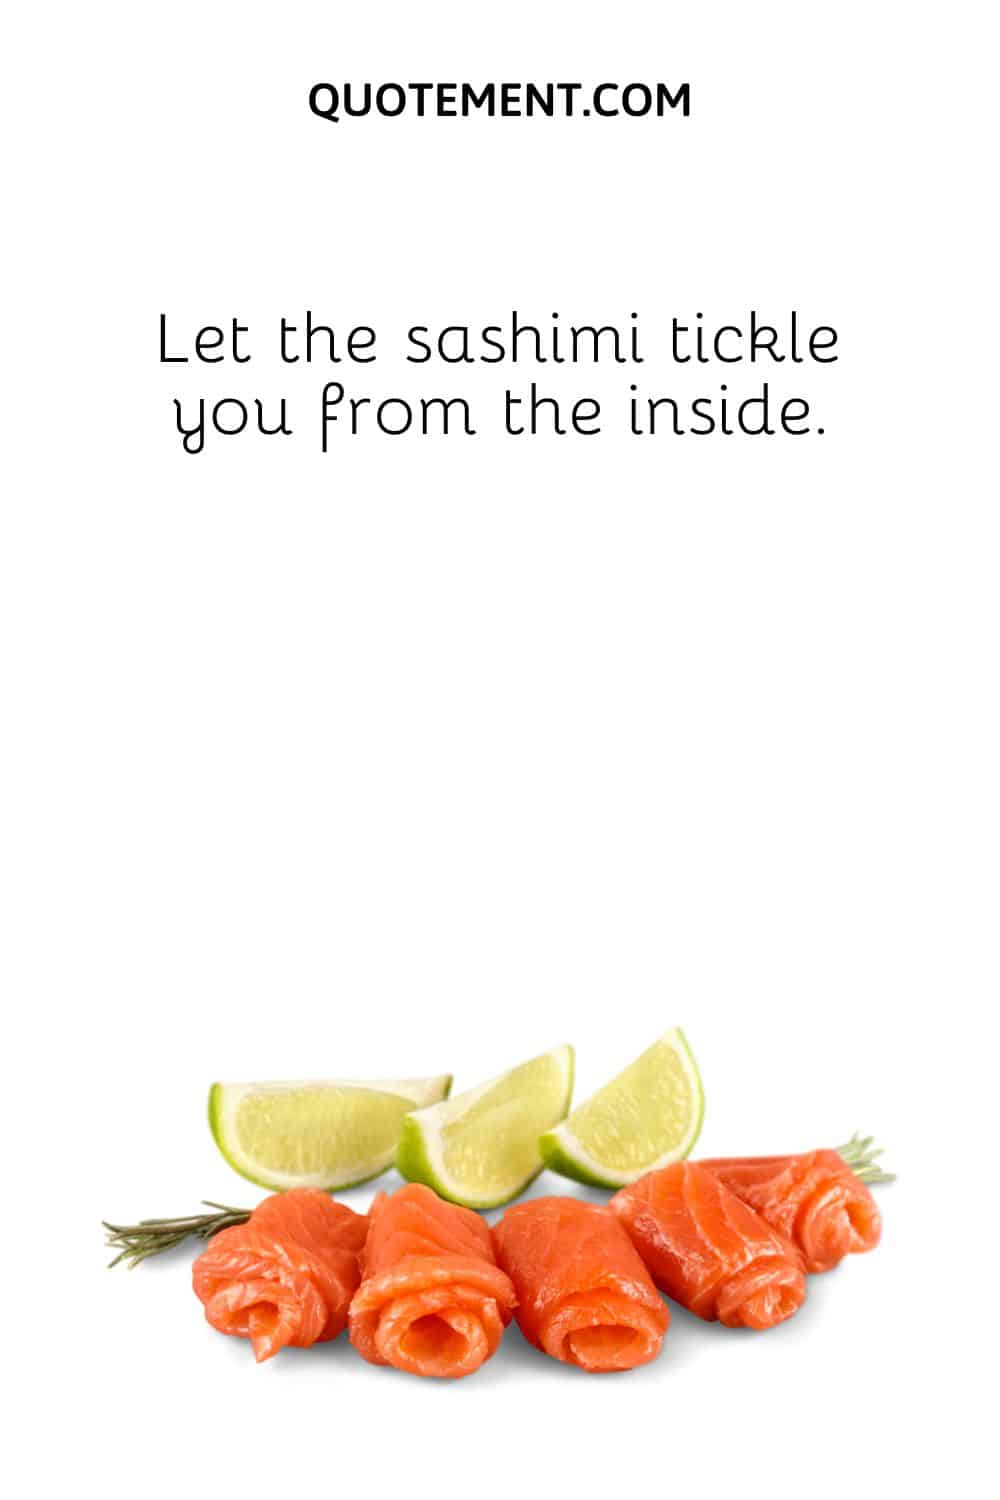 Let the sashimi tickle you from the inside.